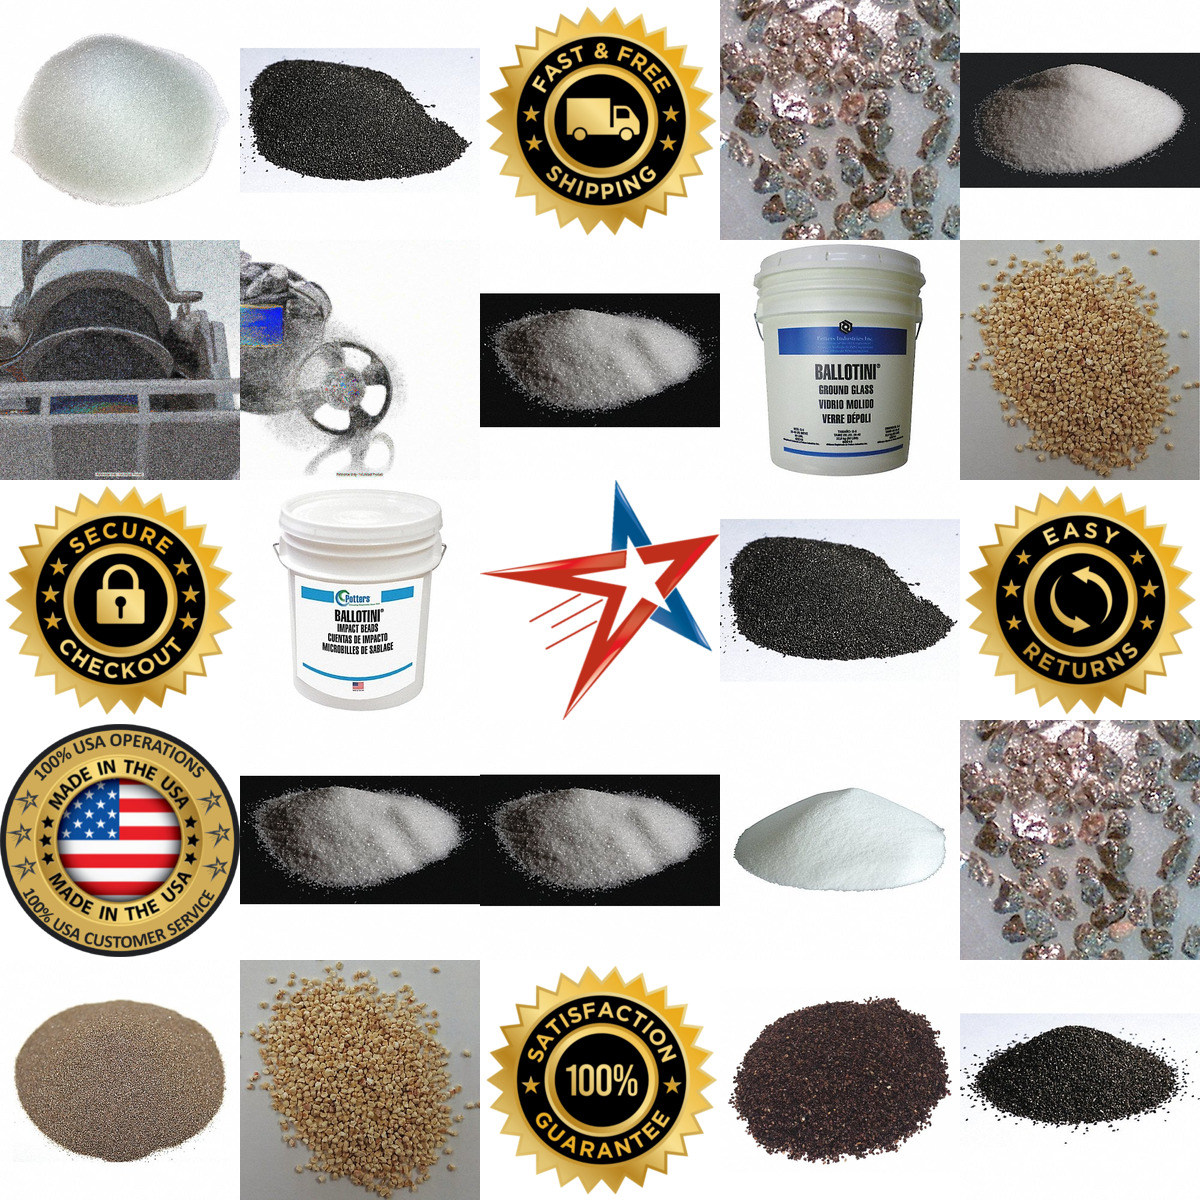 A selection of Abrasive Blasting Media products on GoVets